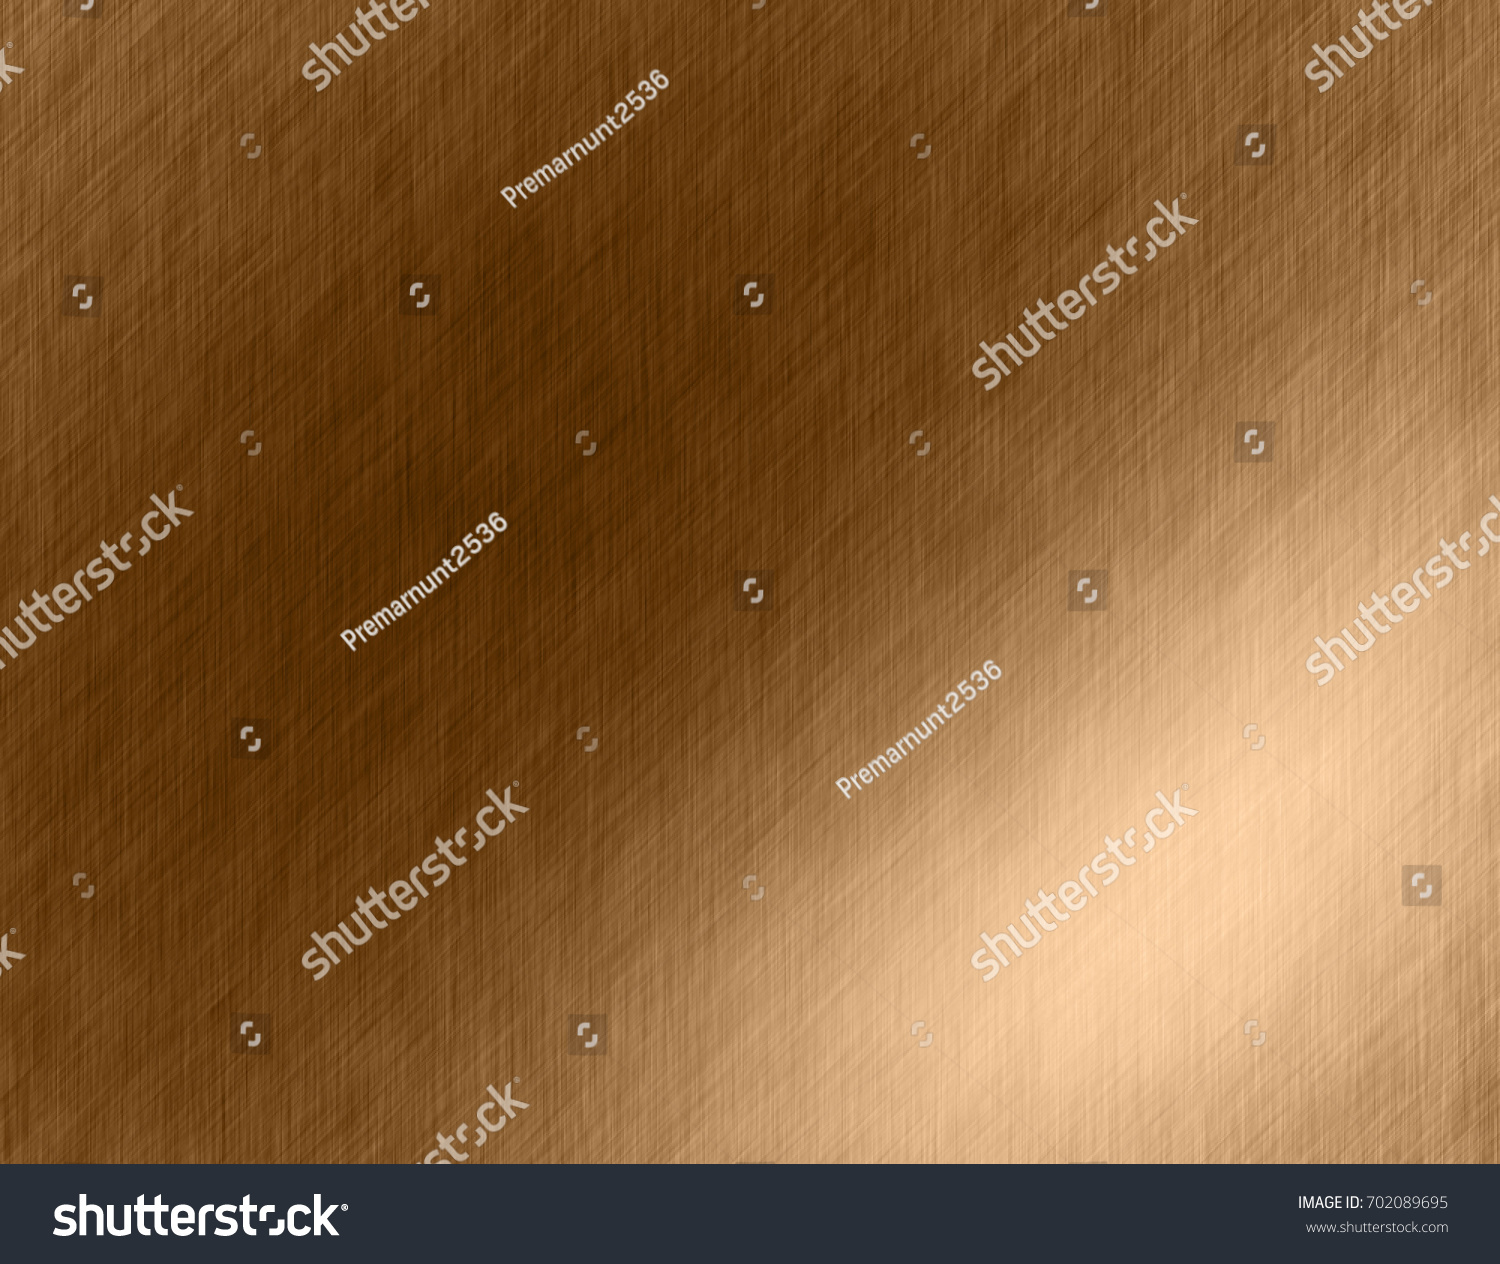 Gold metal brushed background or texture of brushed steel plate with reflections Iron plate and shiny #702089695